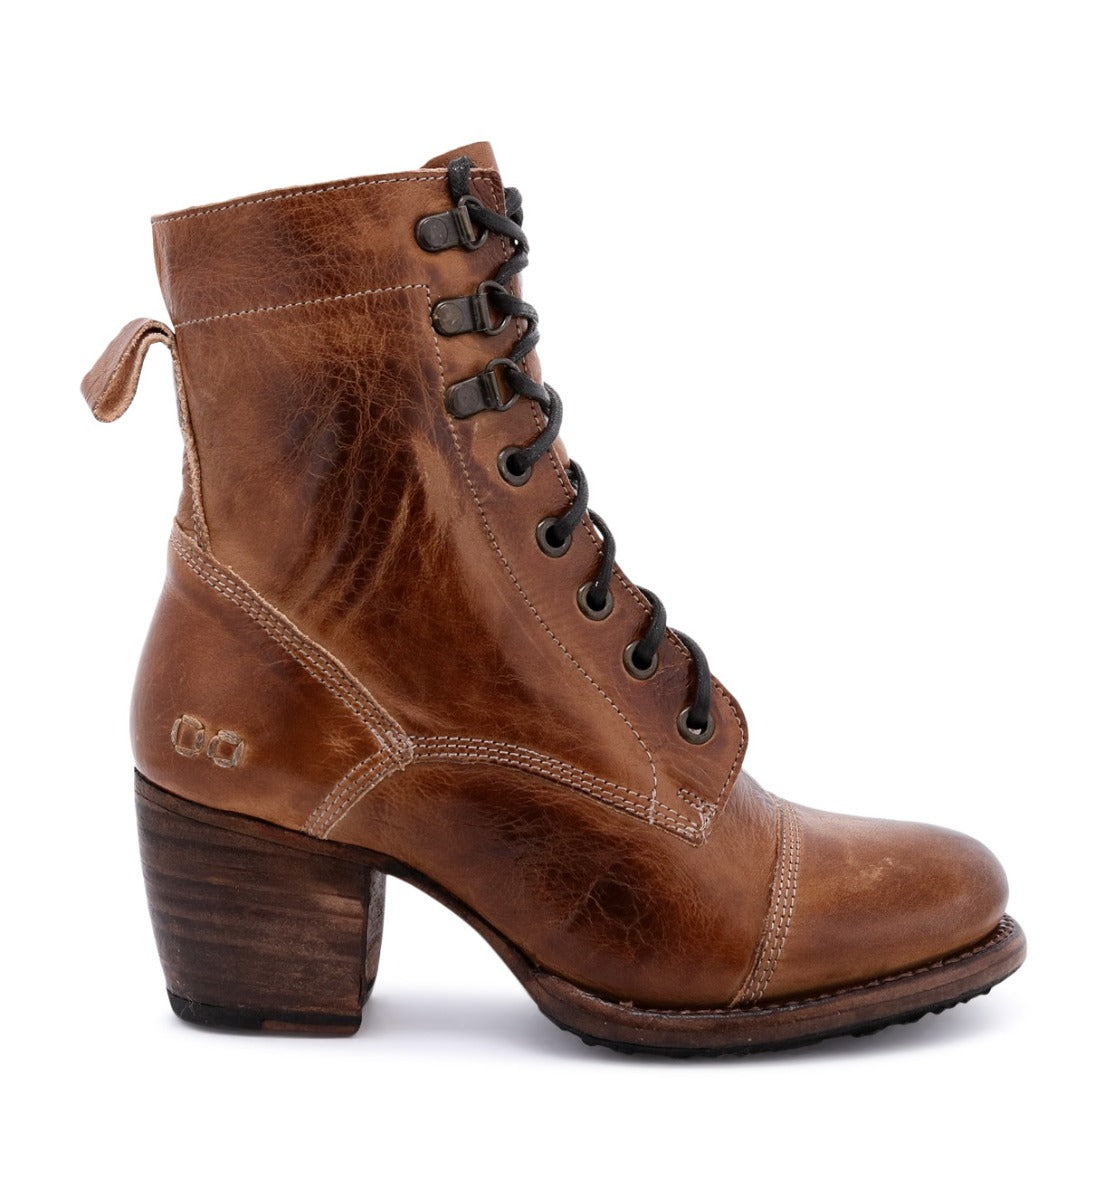 A women's brown leather ankle boot with a wooden heel called Judgement by Bed Stu.